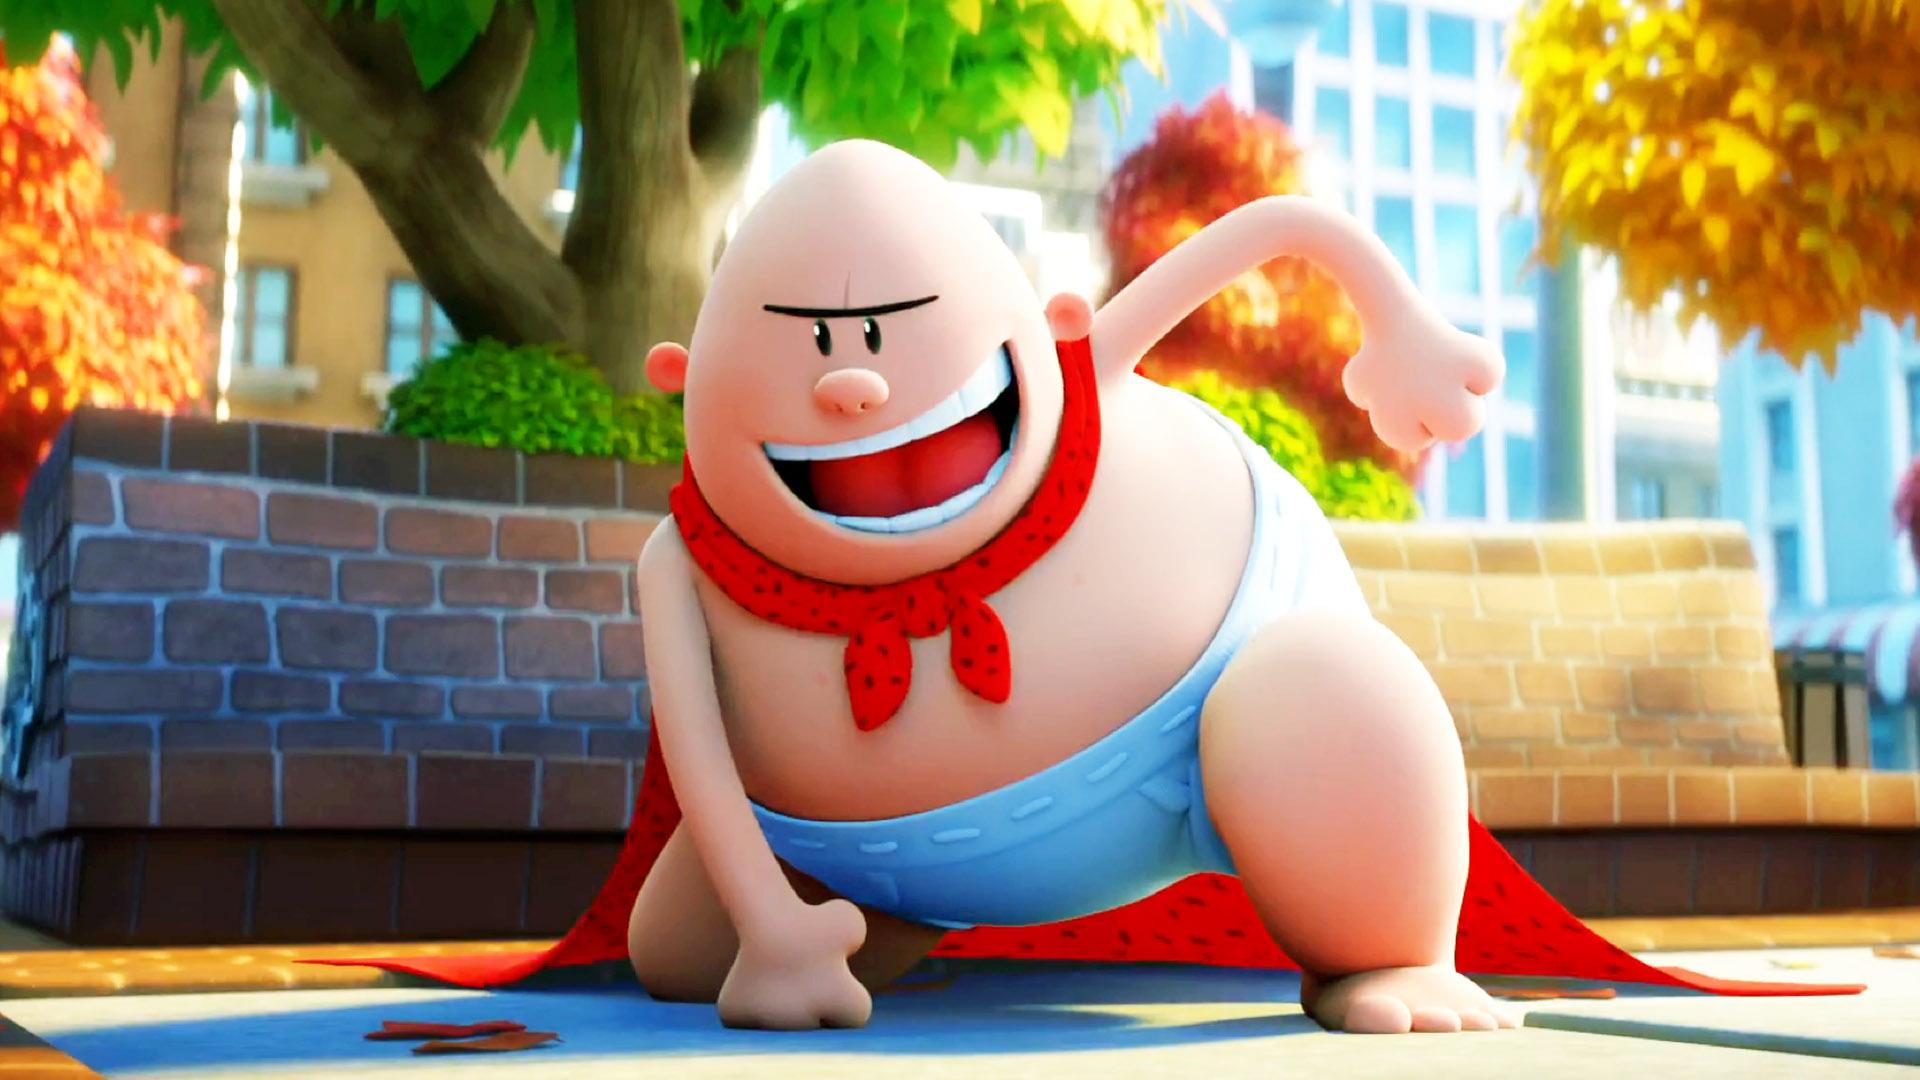 Captain Underpants Wallpapers High Quality.